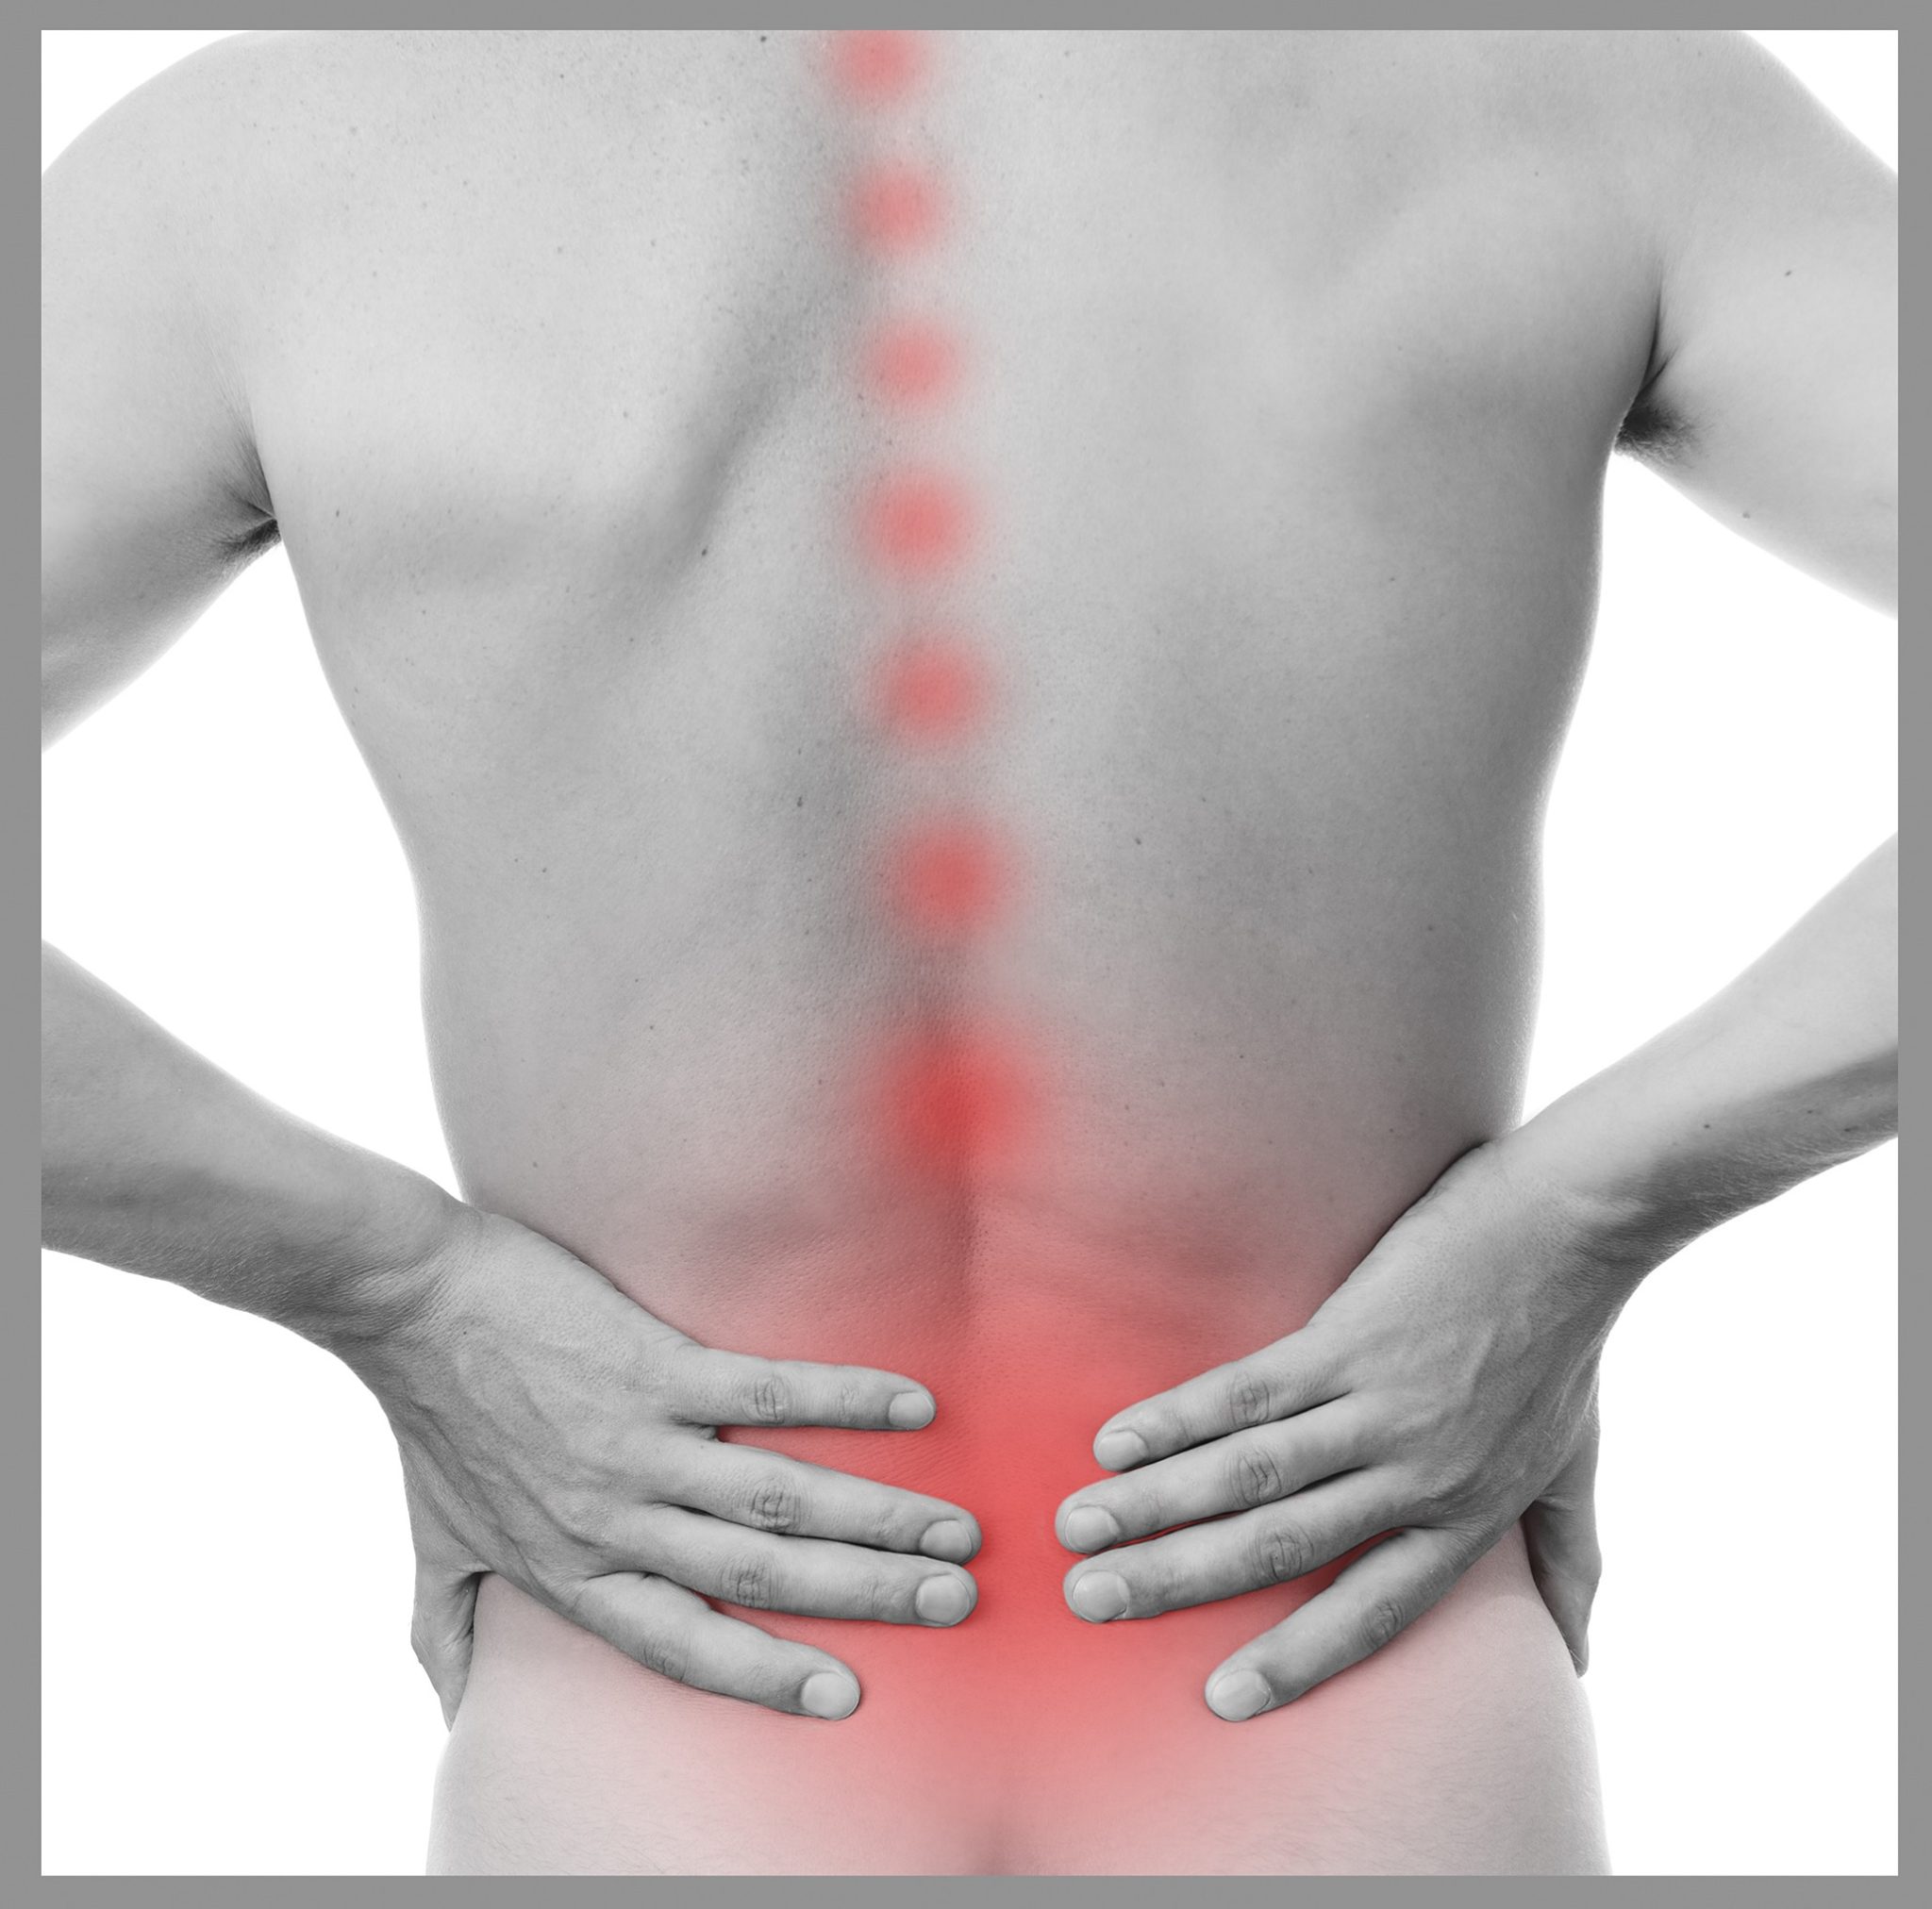 what is emg test looks like for lower back pain